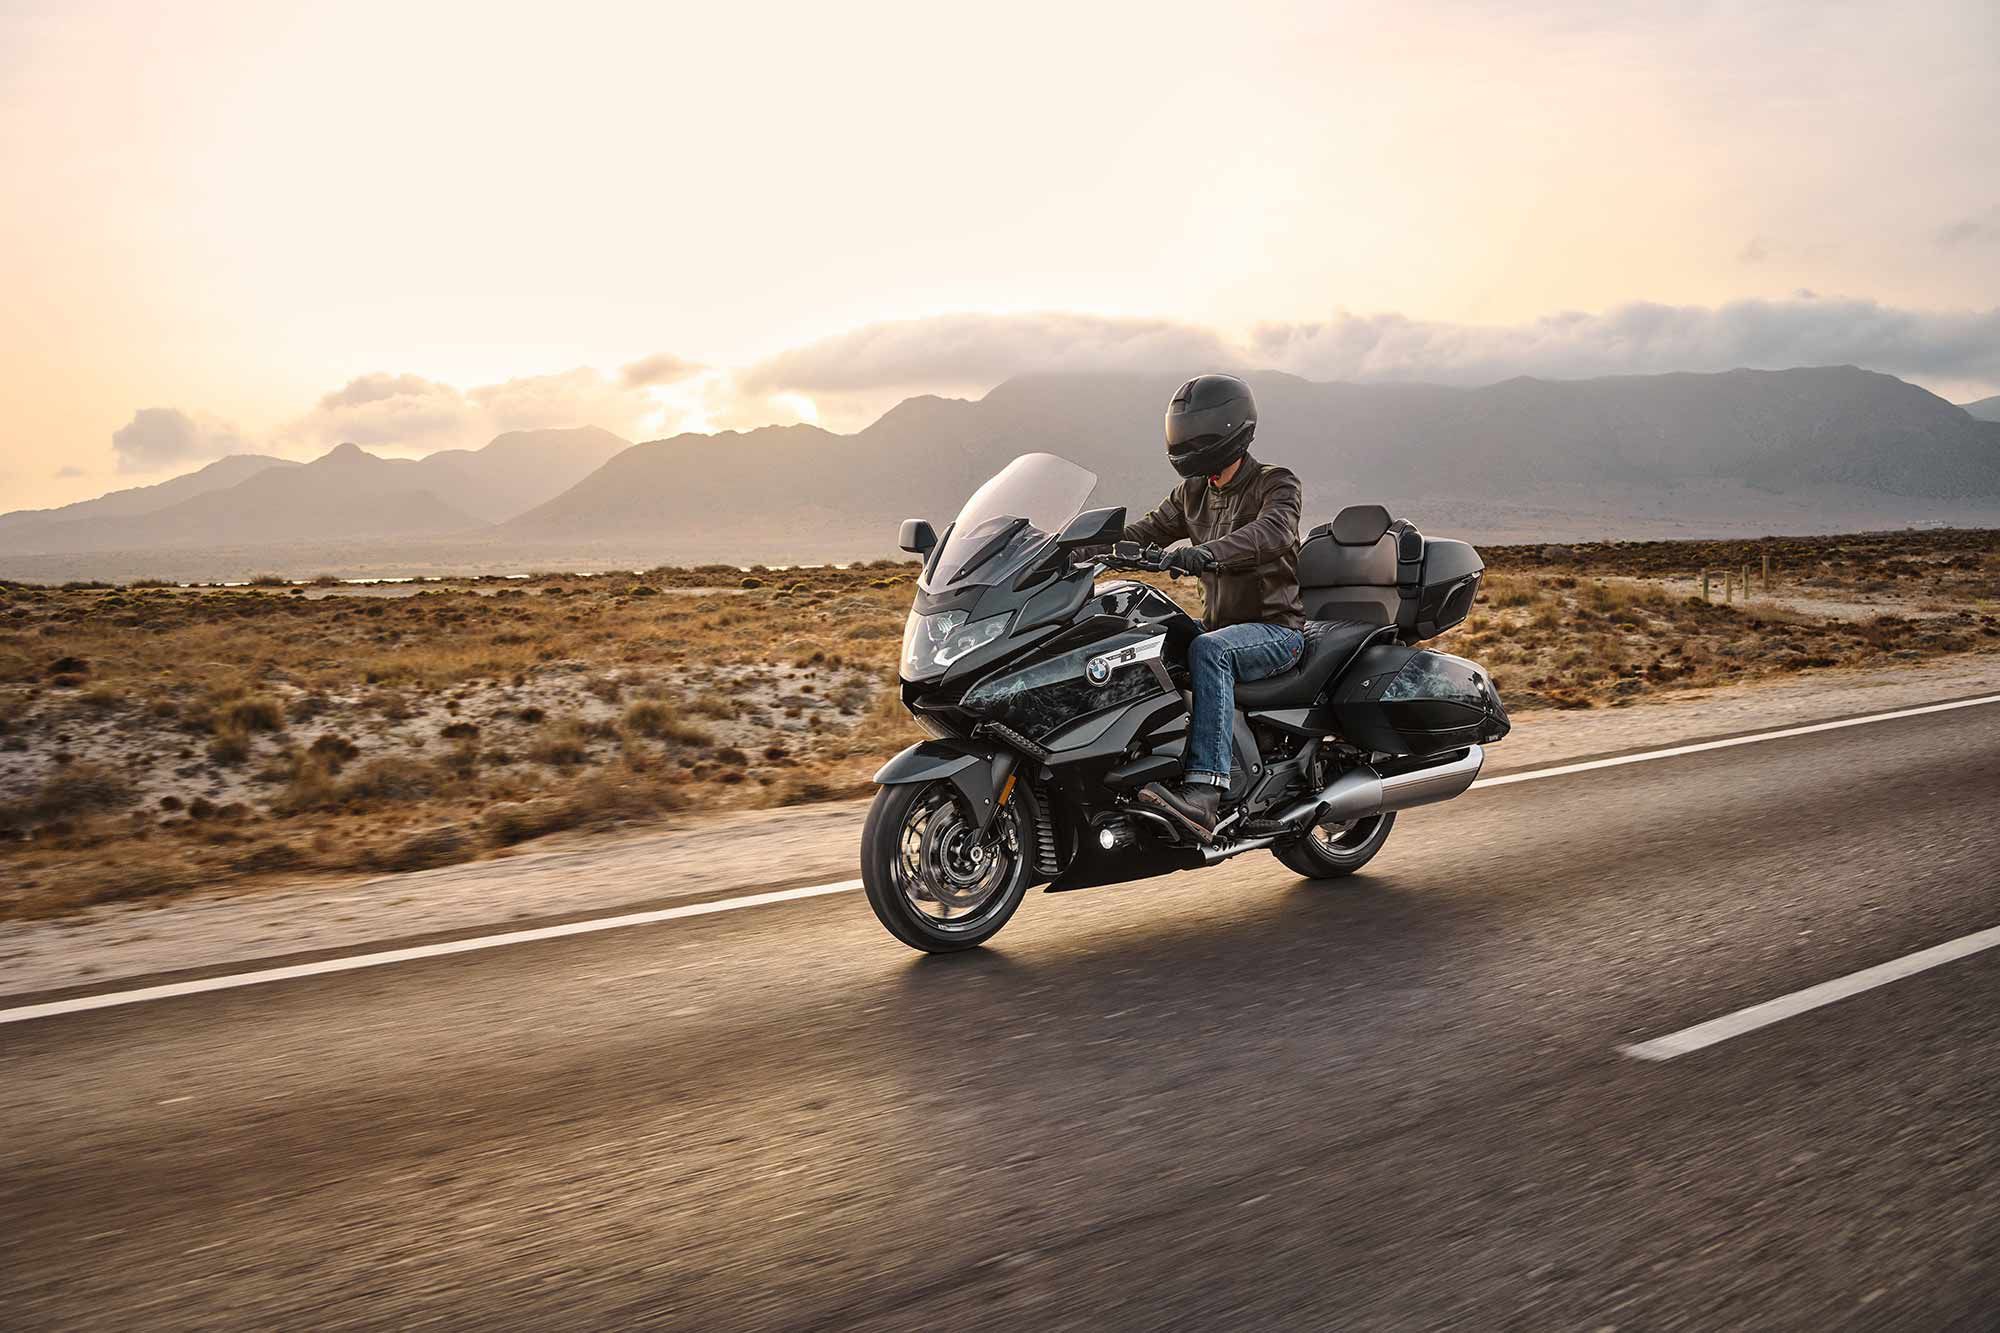 The 2022 BMW K 1600 Grand America will start at $27,745.